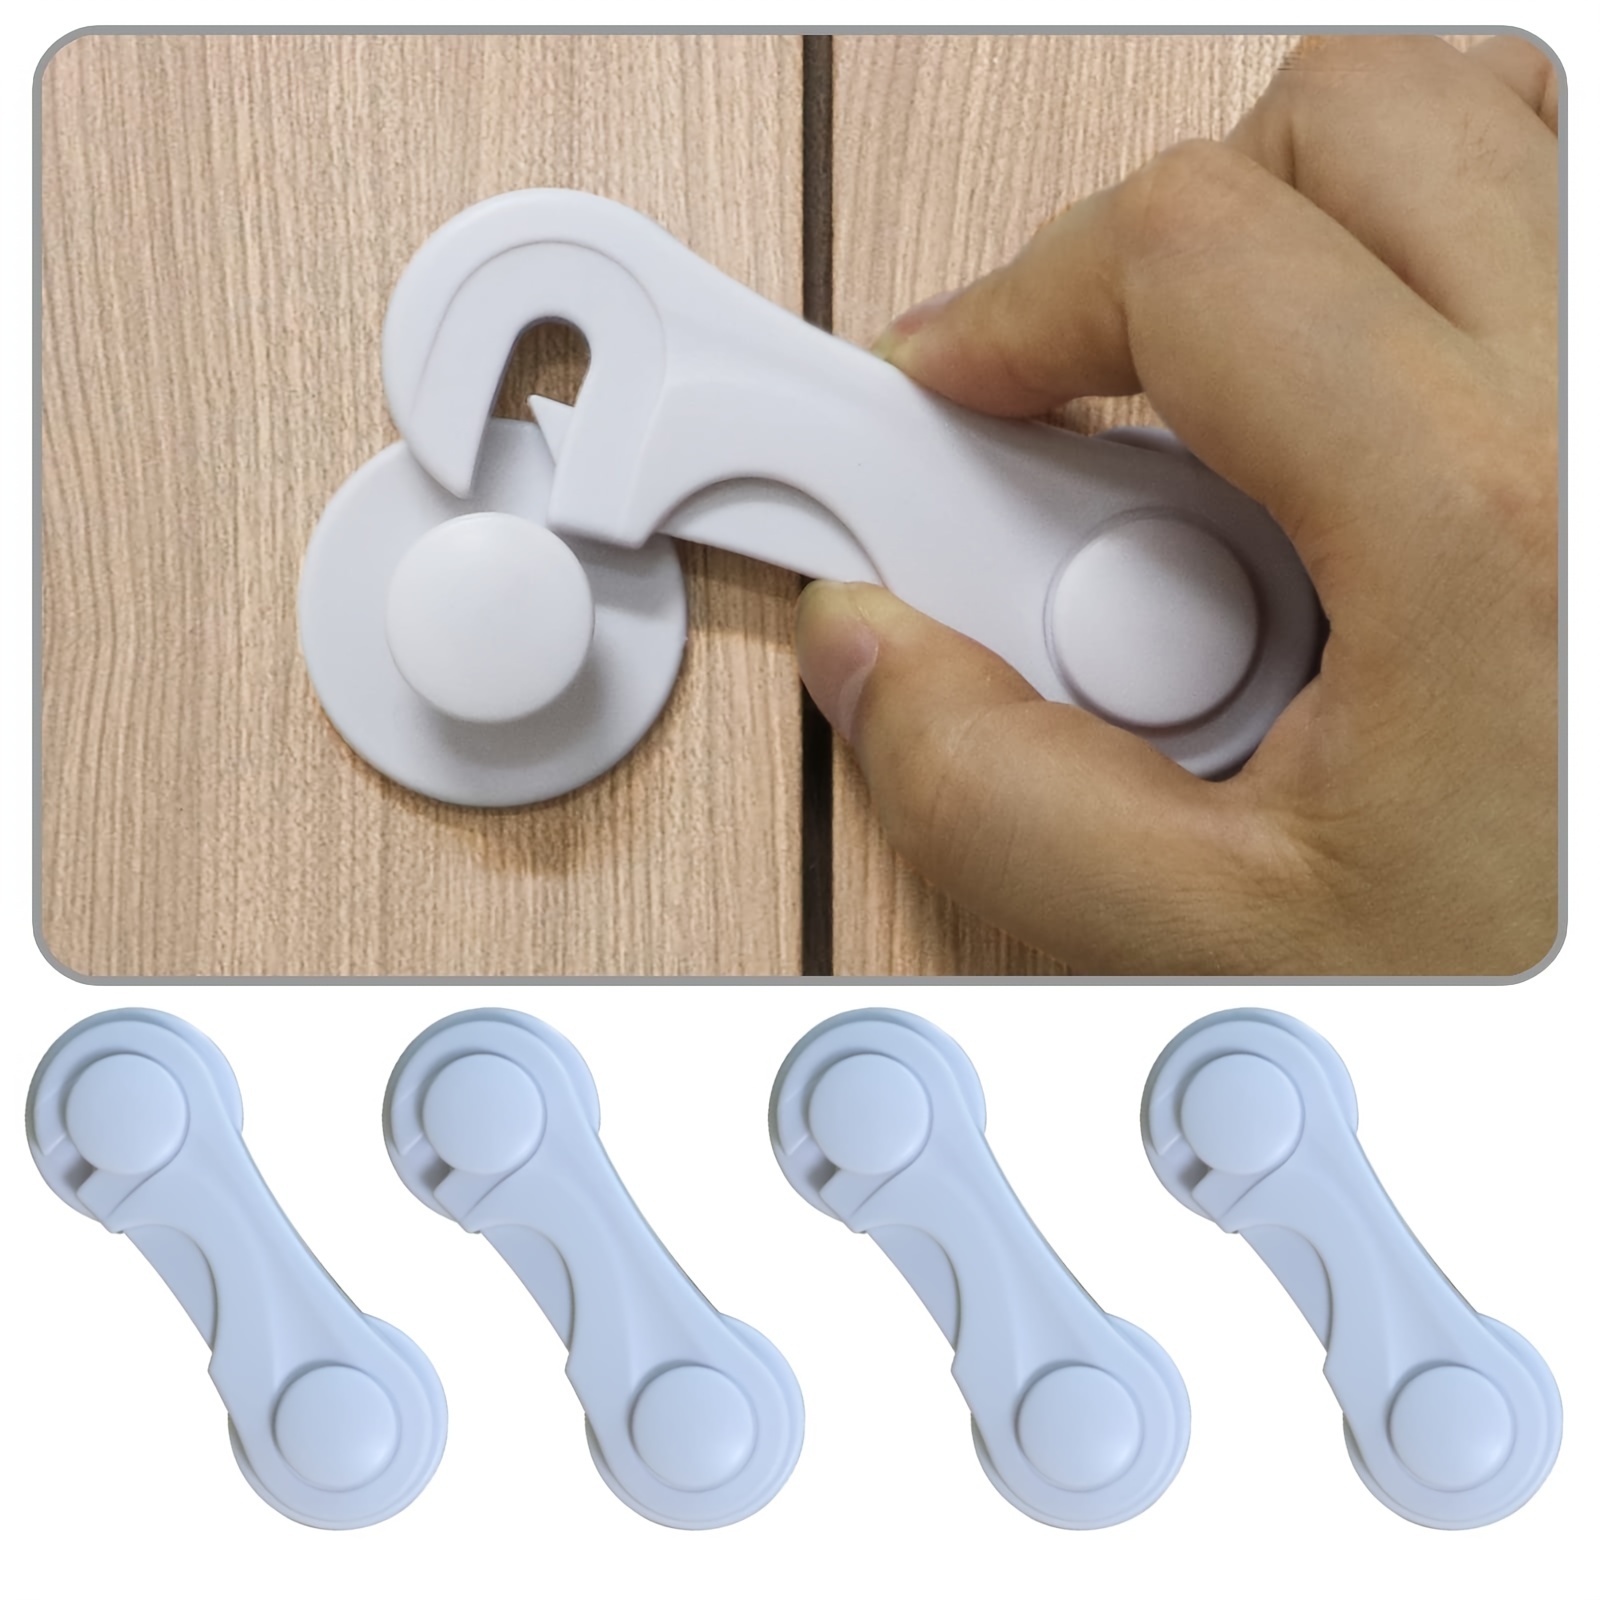 Baby Products Online - Baby safety lock lock Anti-theft security prevents  babies from wanting to open the door Plastic safety lock - Kideno